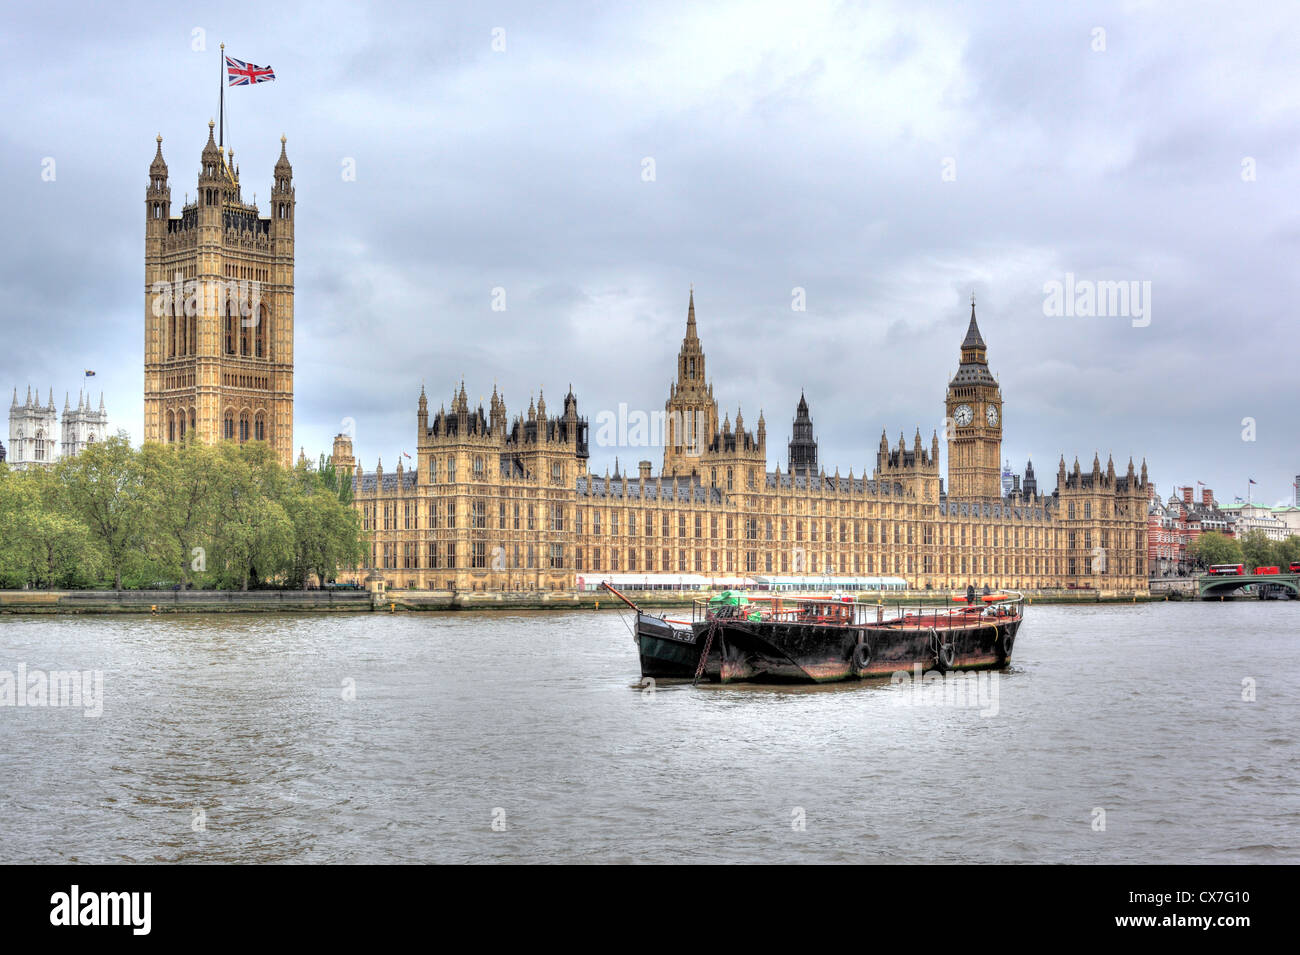 The Palace of Westminster and Victoria Tower (Houses of Parliament), London, UK Stock Photo